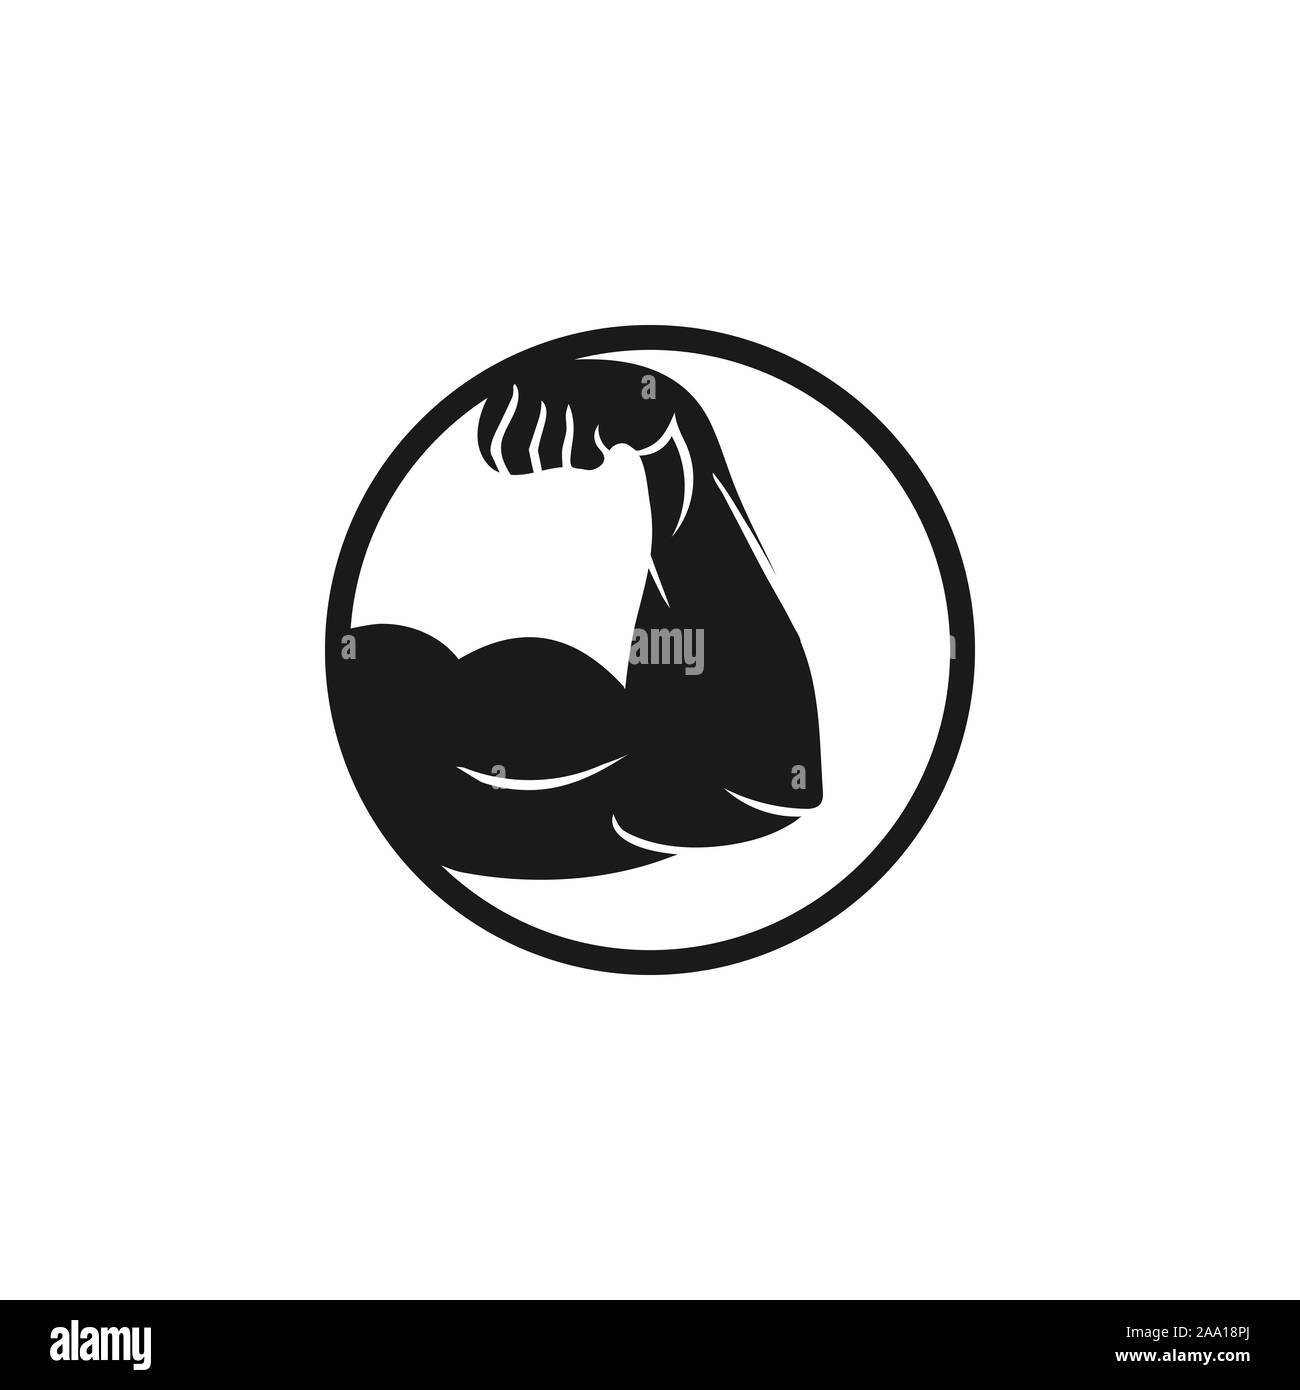 Muscle arm icon flat illustration. Bicep bodybuilder muscular biceps. Stock Vector